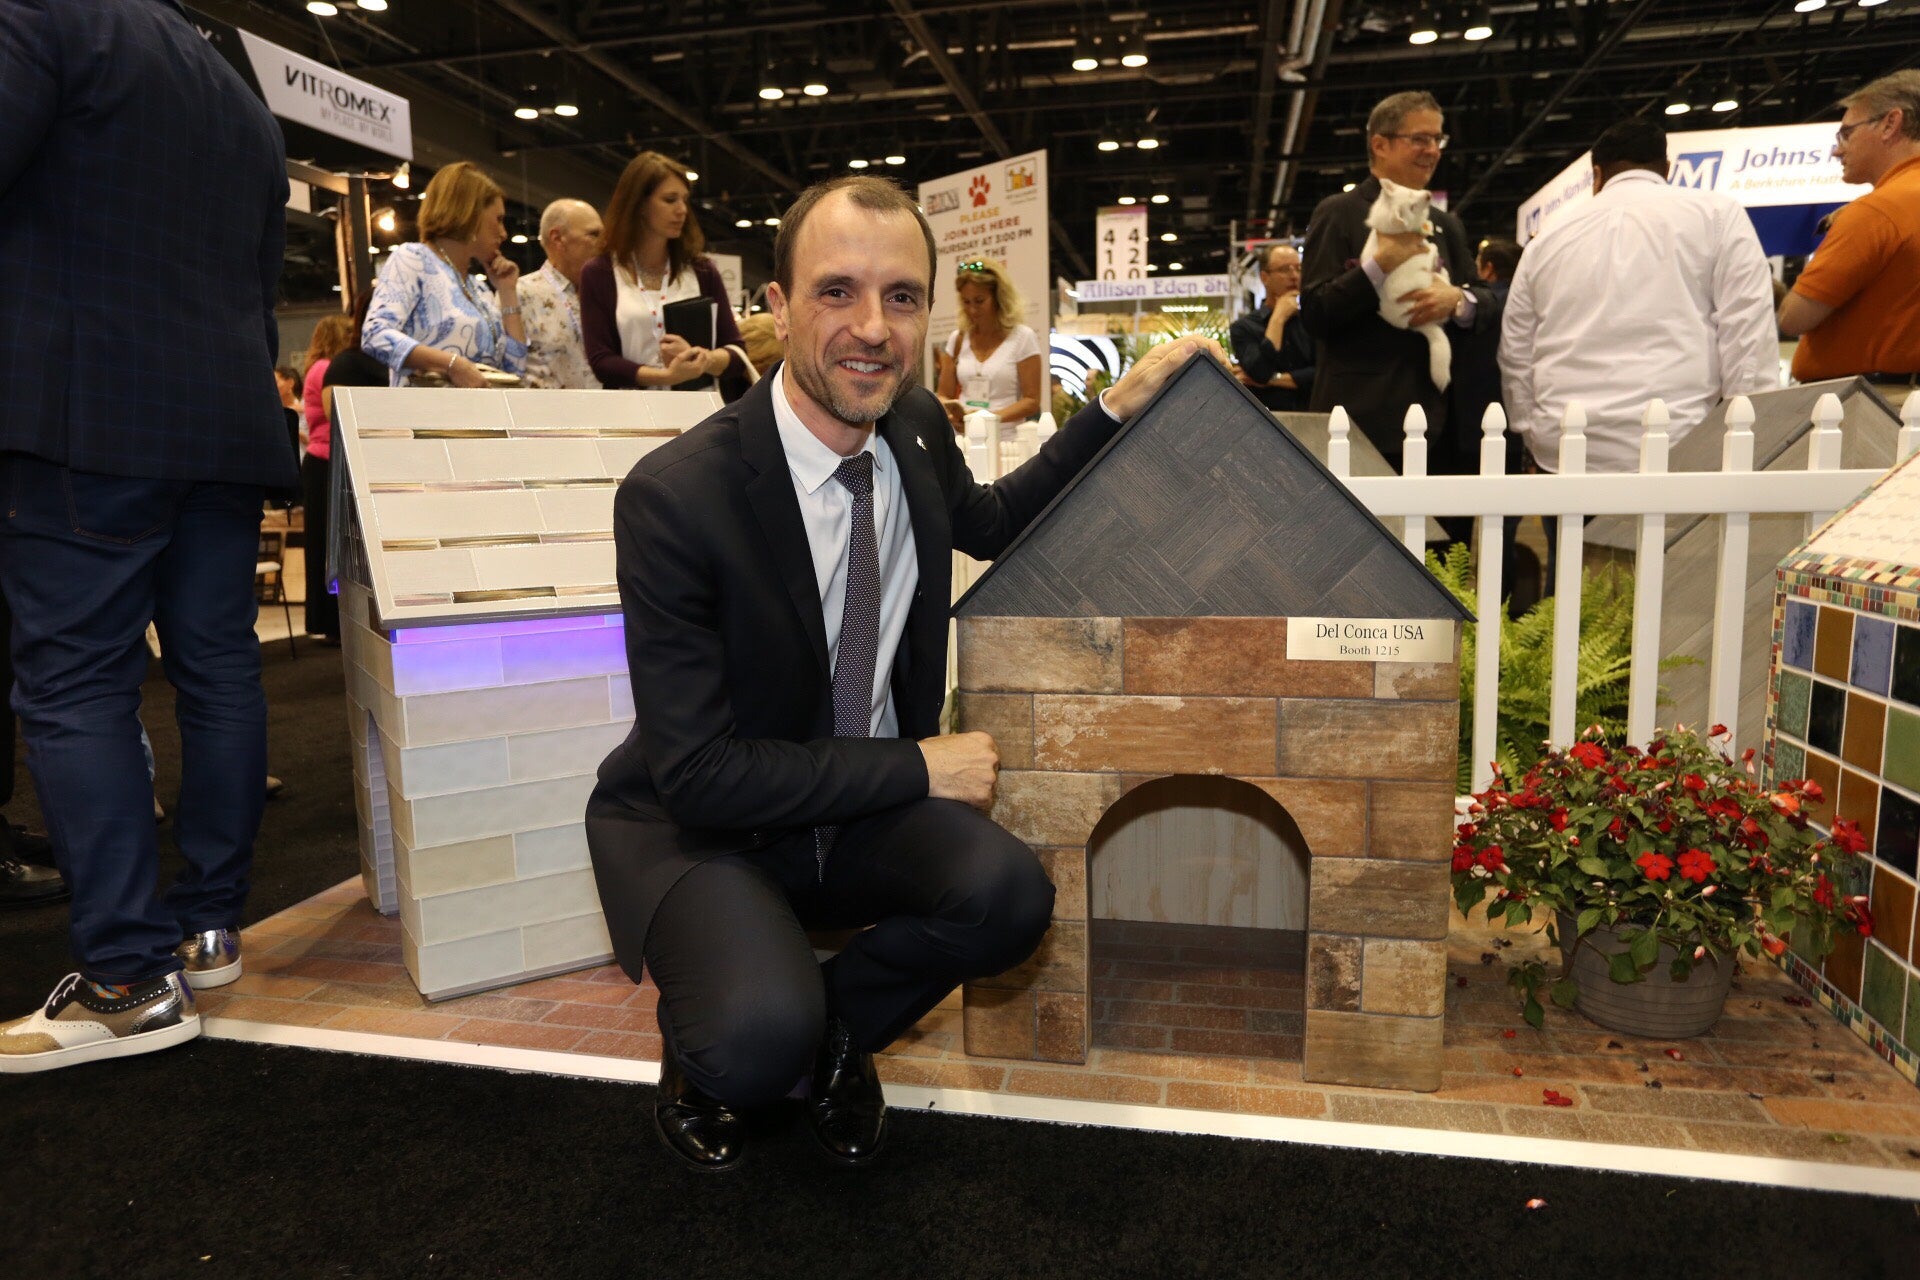 Del Conca USA donates tiled doghouse at Coverings 2017